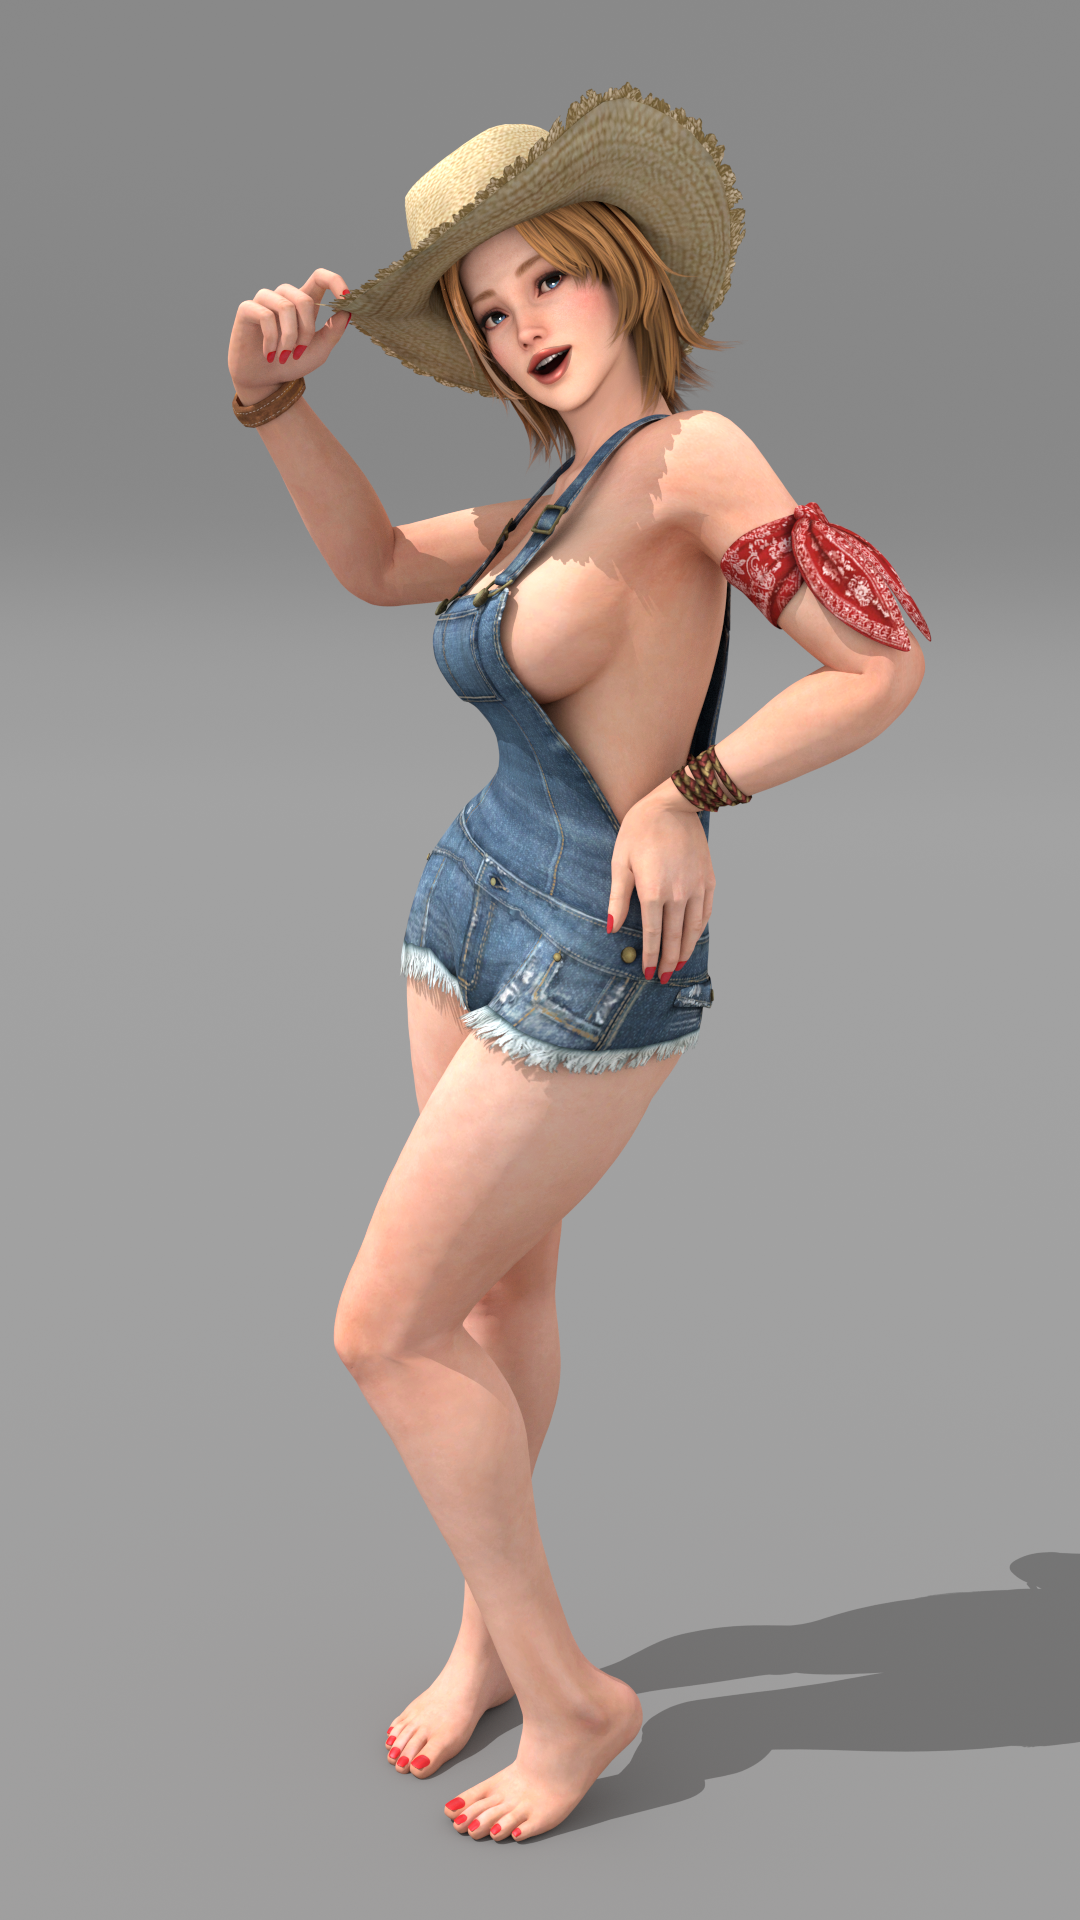 xpshenron:  Bodacious Cowgirl Any girl can wear overalls and be sexy. But Tina OWNS